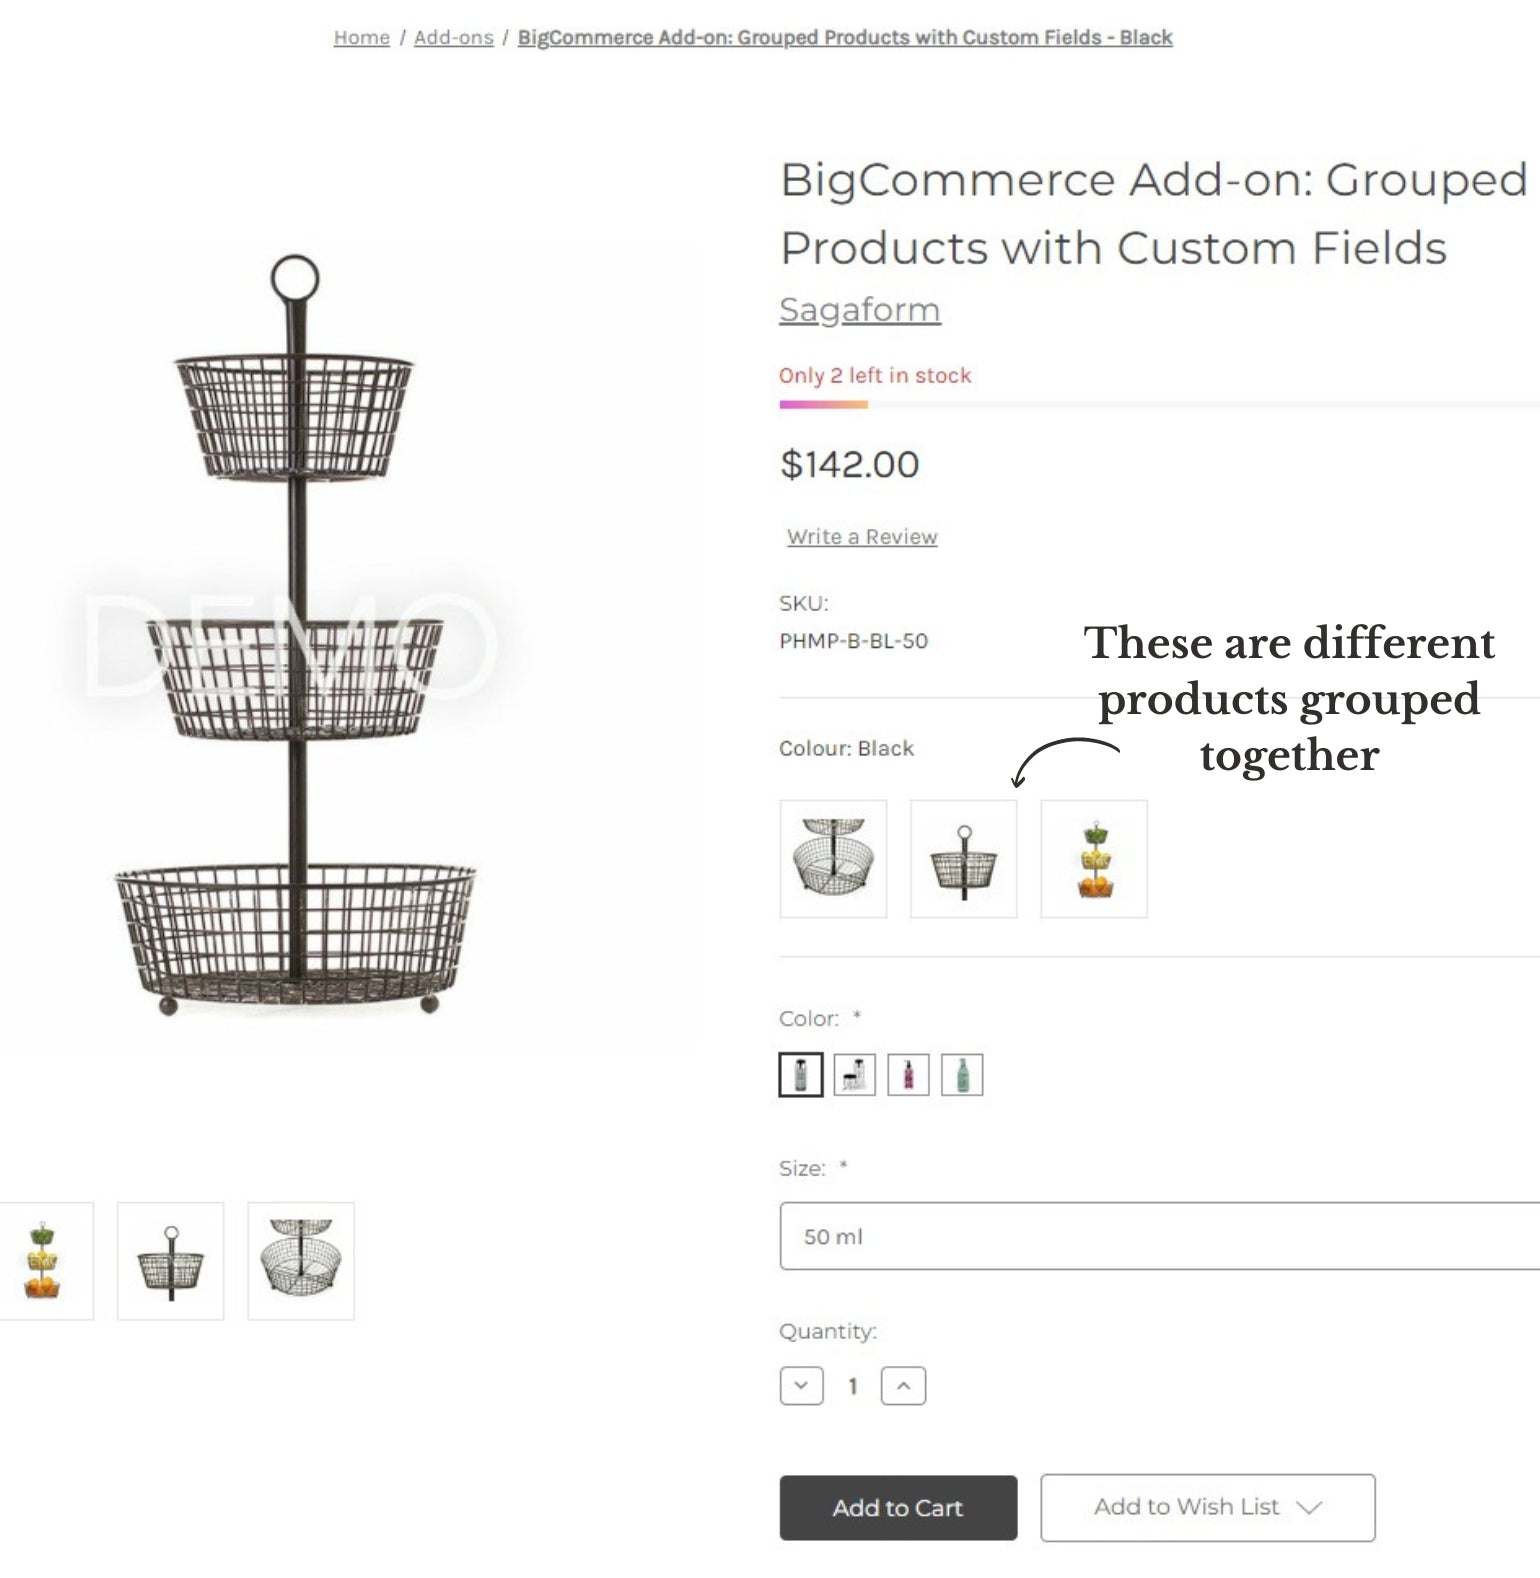 BigCommerce Add-on: Grouped Products with Custom Fields